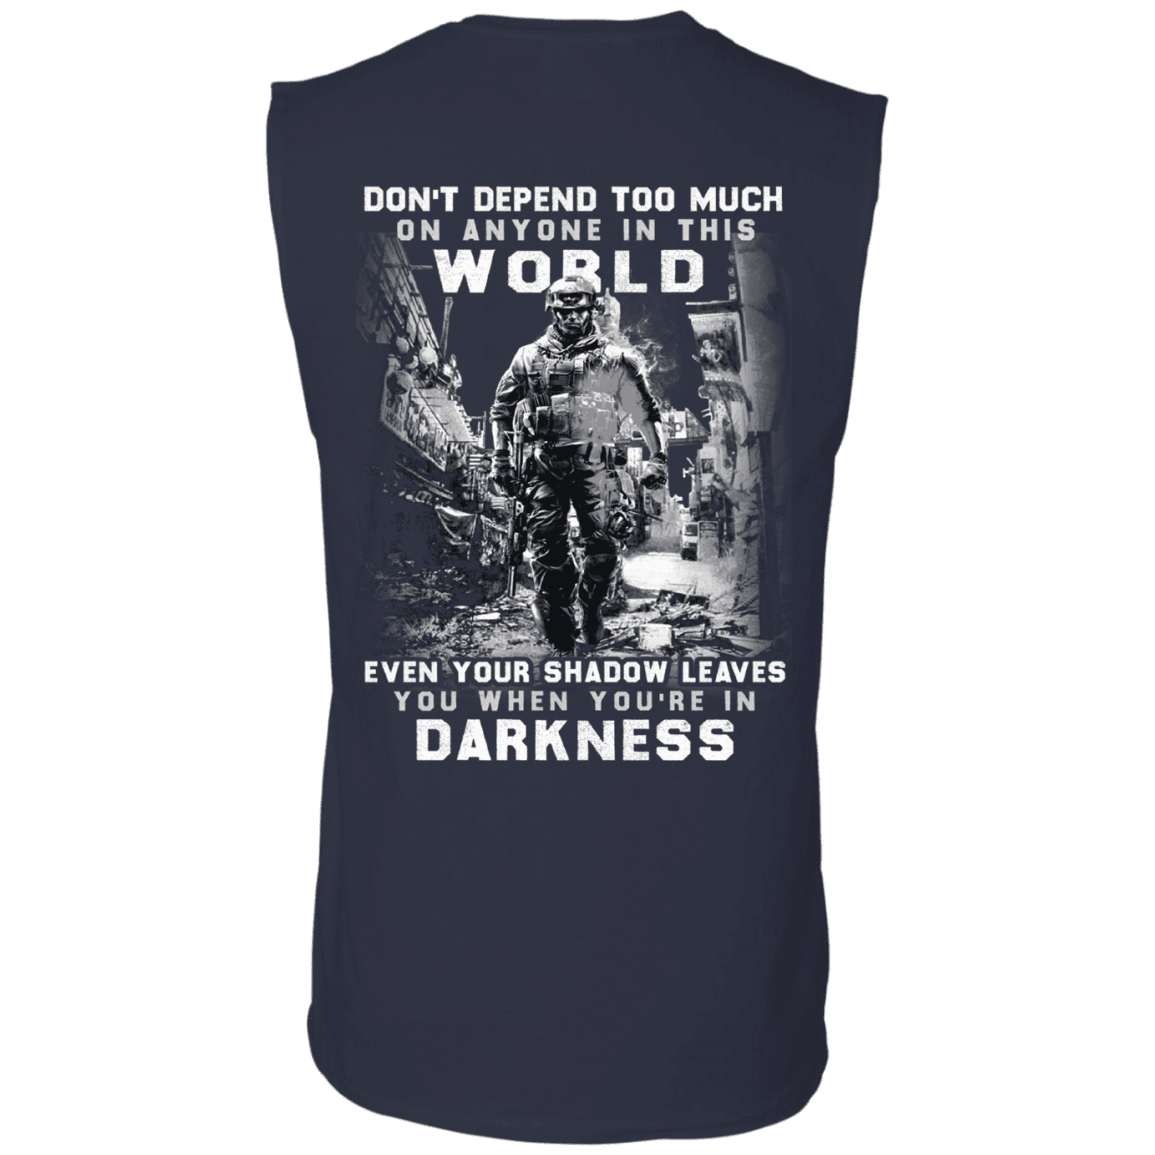 Military T-Shirt "Veteran - Don't Defend Too Much Anyone In This World"-TShirt-General-Veterans Nation